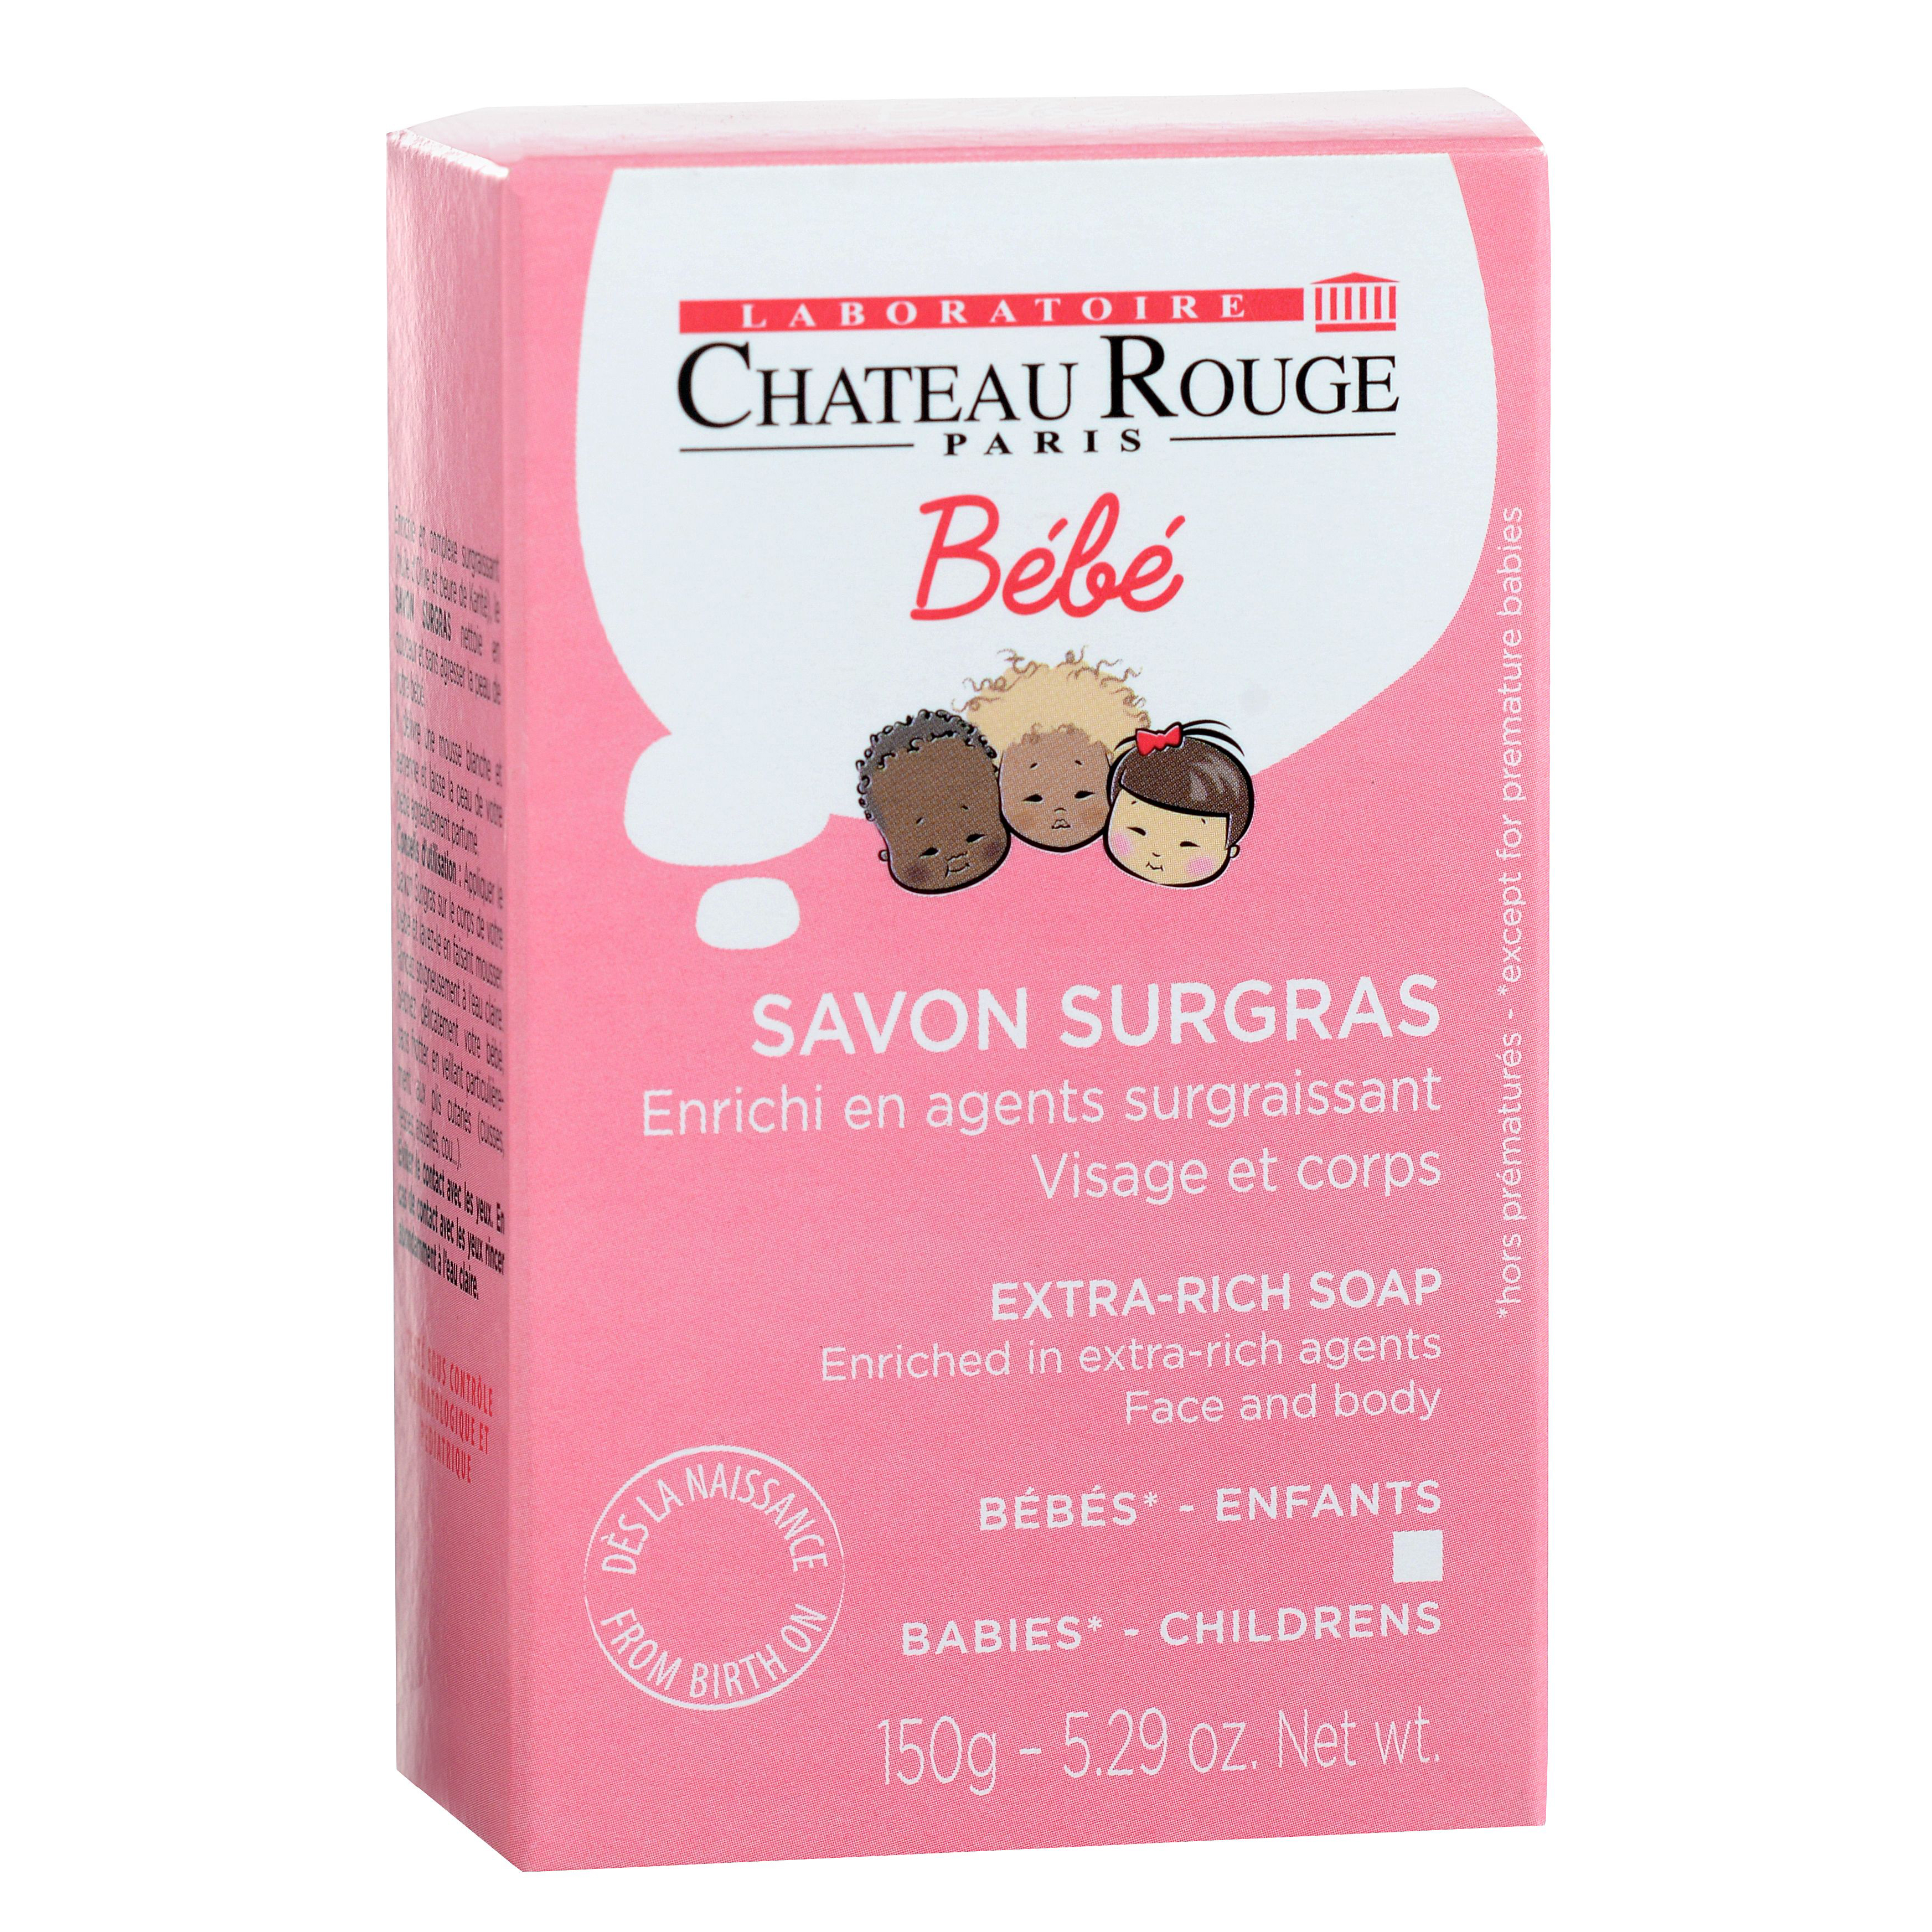 CHATEAU ROUGE BABY EXTRA-RICH SOAP. 